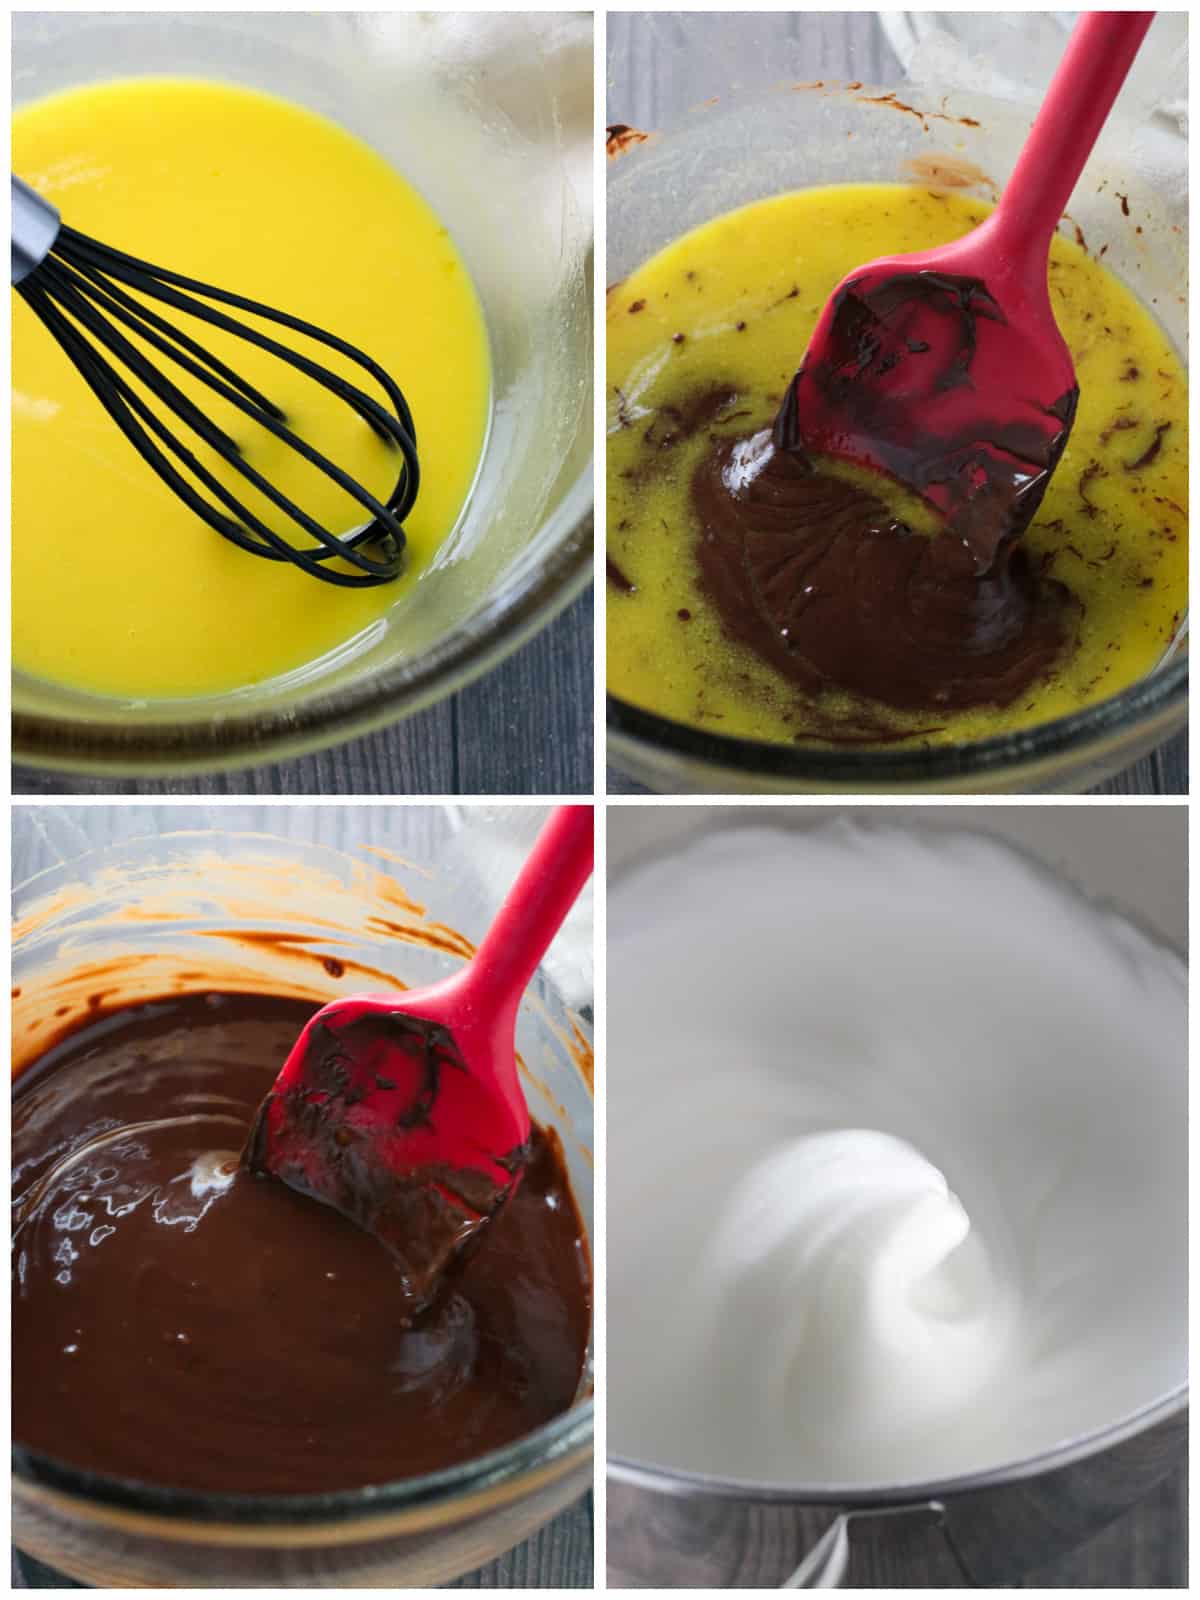 A collage which shows the process of mixing the chocolate cake batter. Left to right:  Whisking the egg yolks, mixing the chocolate batter into the egg yolks, then mixing the chocolate-yolk batter, and last, egg whites whipped to stiff peaks.